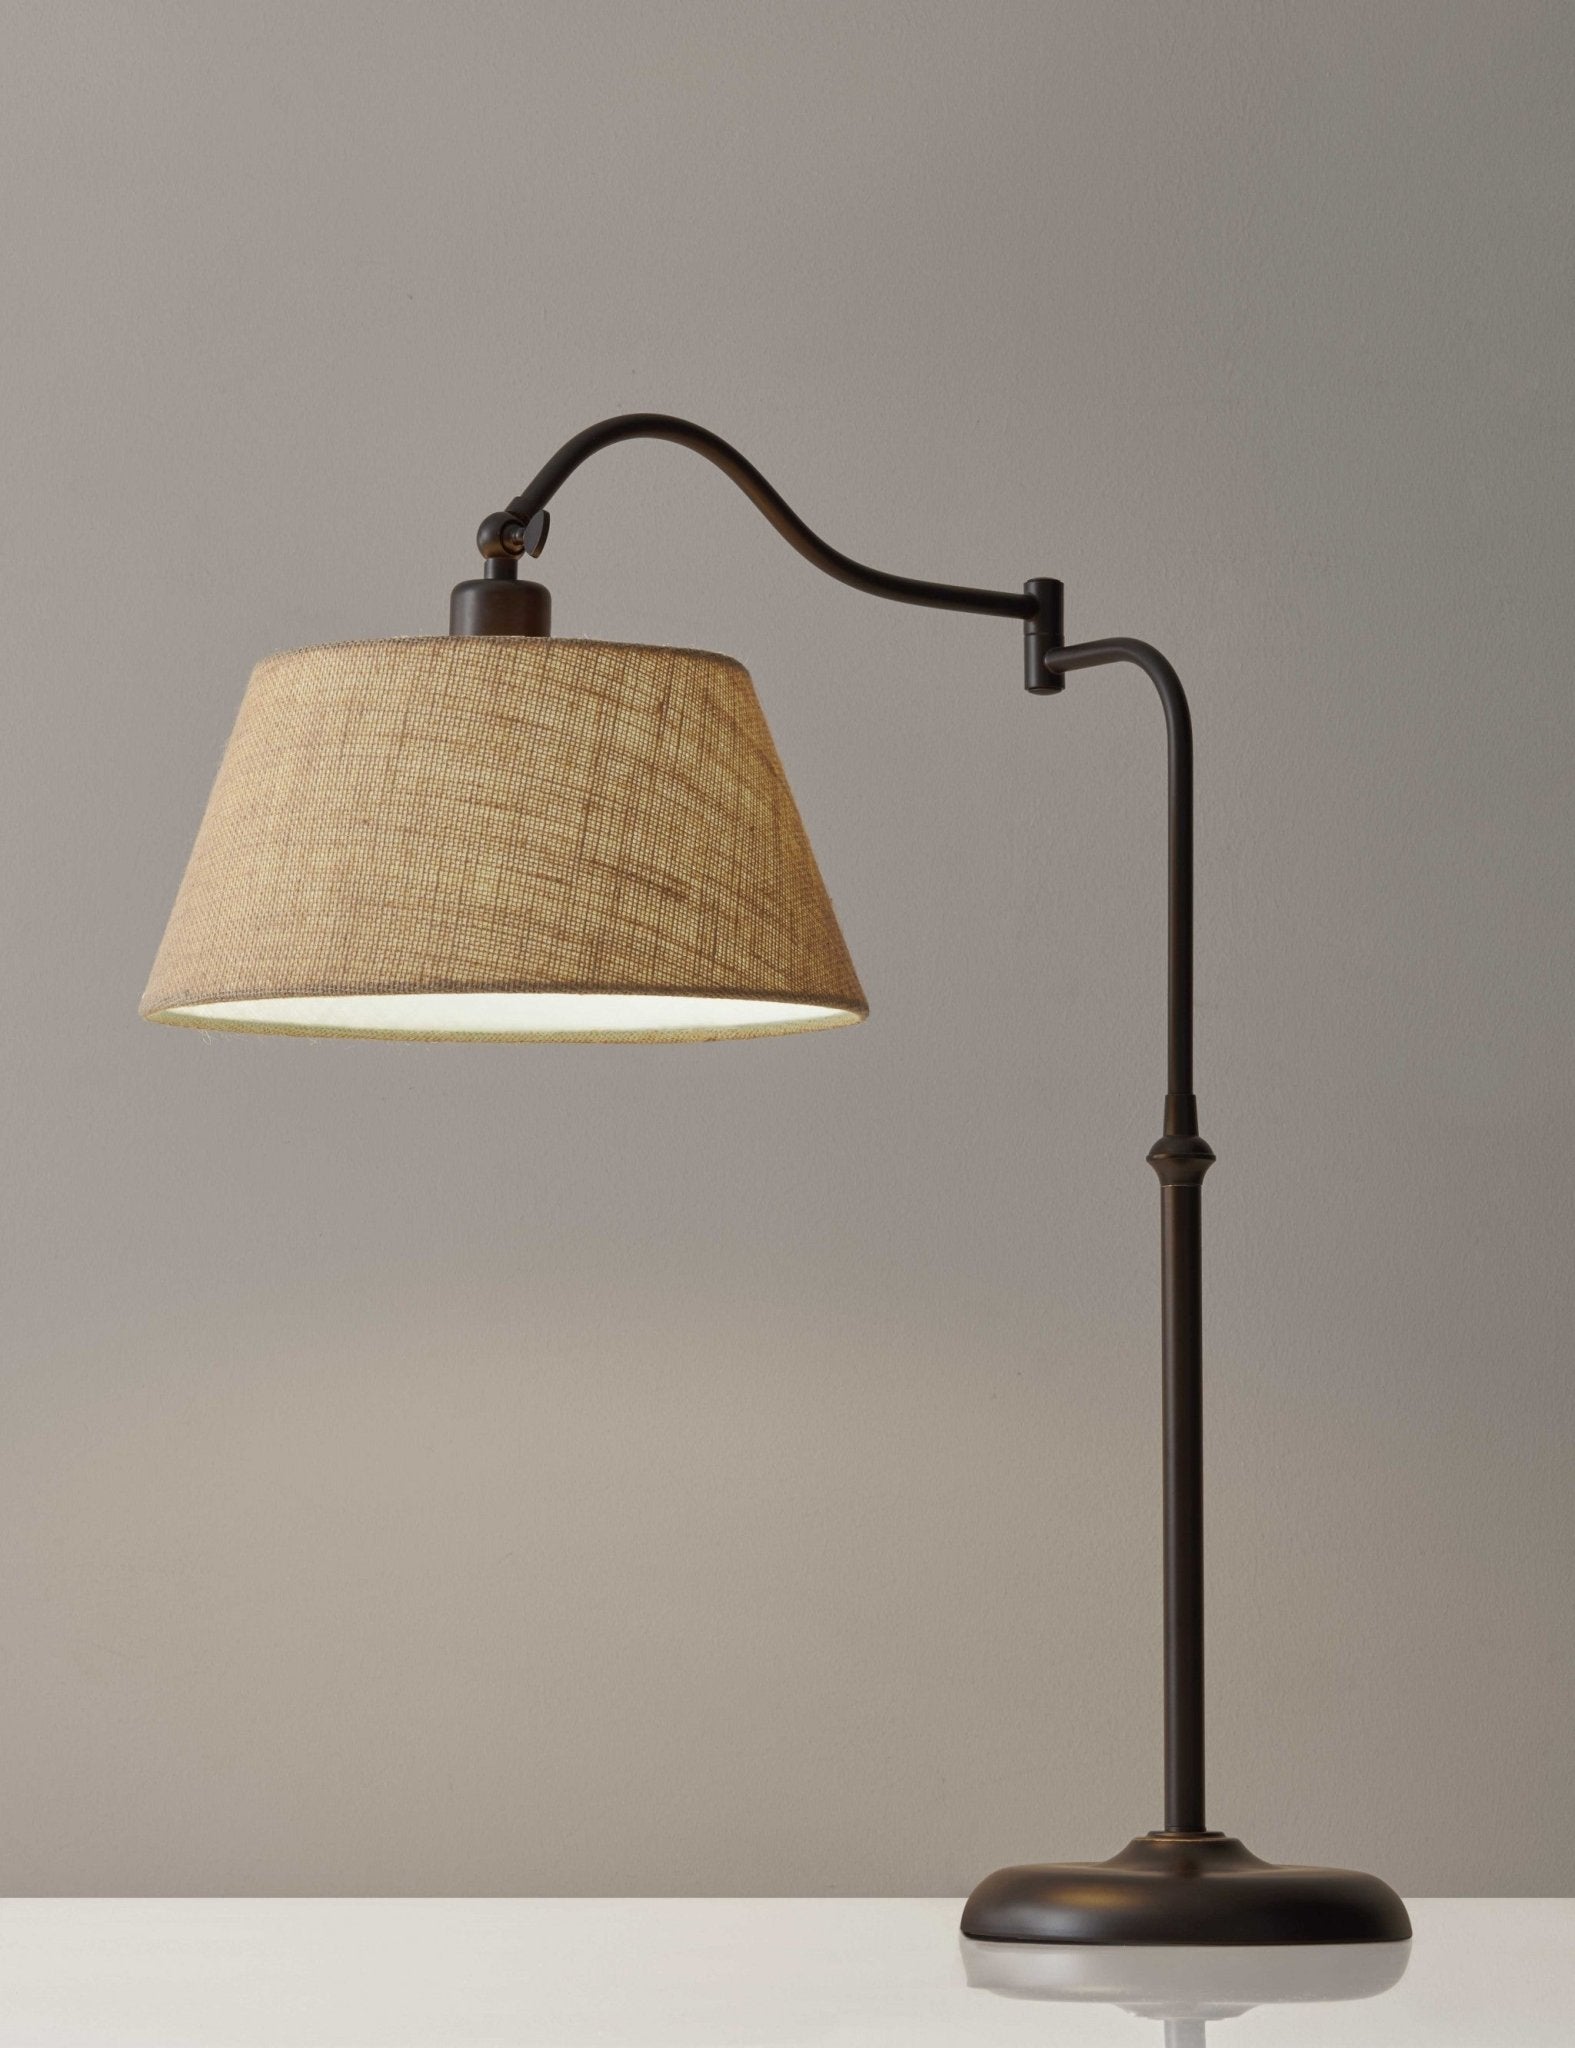 Dark Bronze Metal Swing Arm Adjustable Table Lamp - Tuesday Morning-Table Lamps